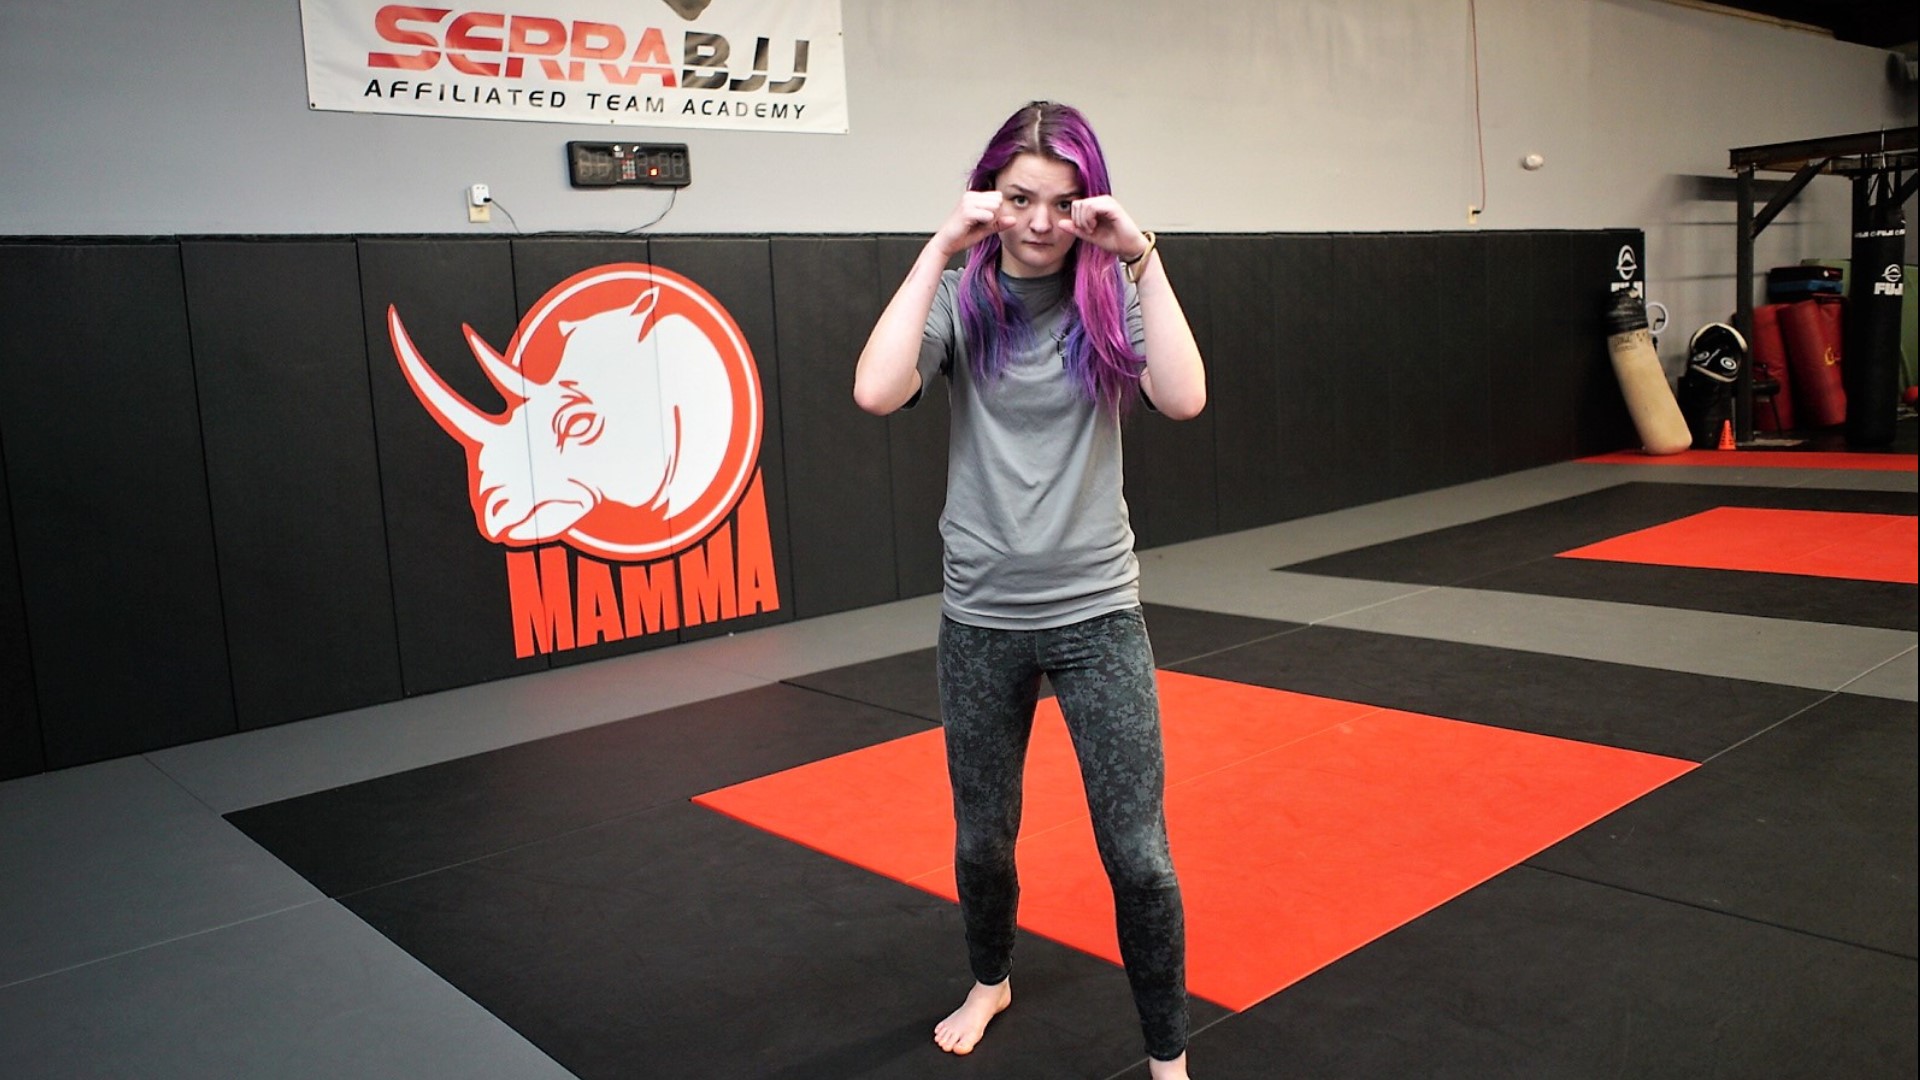 "I want to be up there. I want to be in the world of MMA. That's what I want to do with my life. That's who I am," Catherine Mullis said.